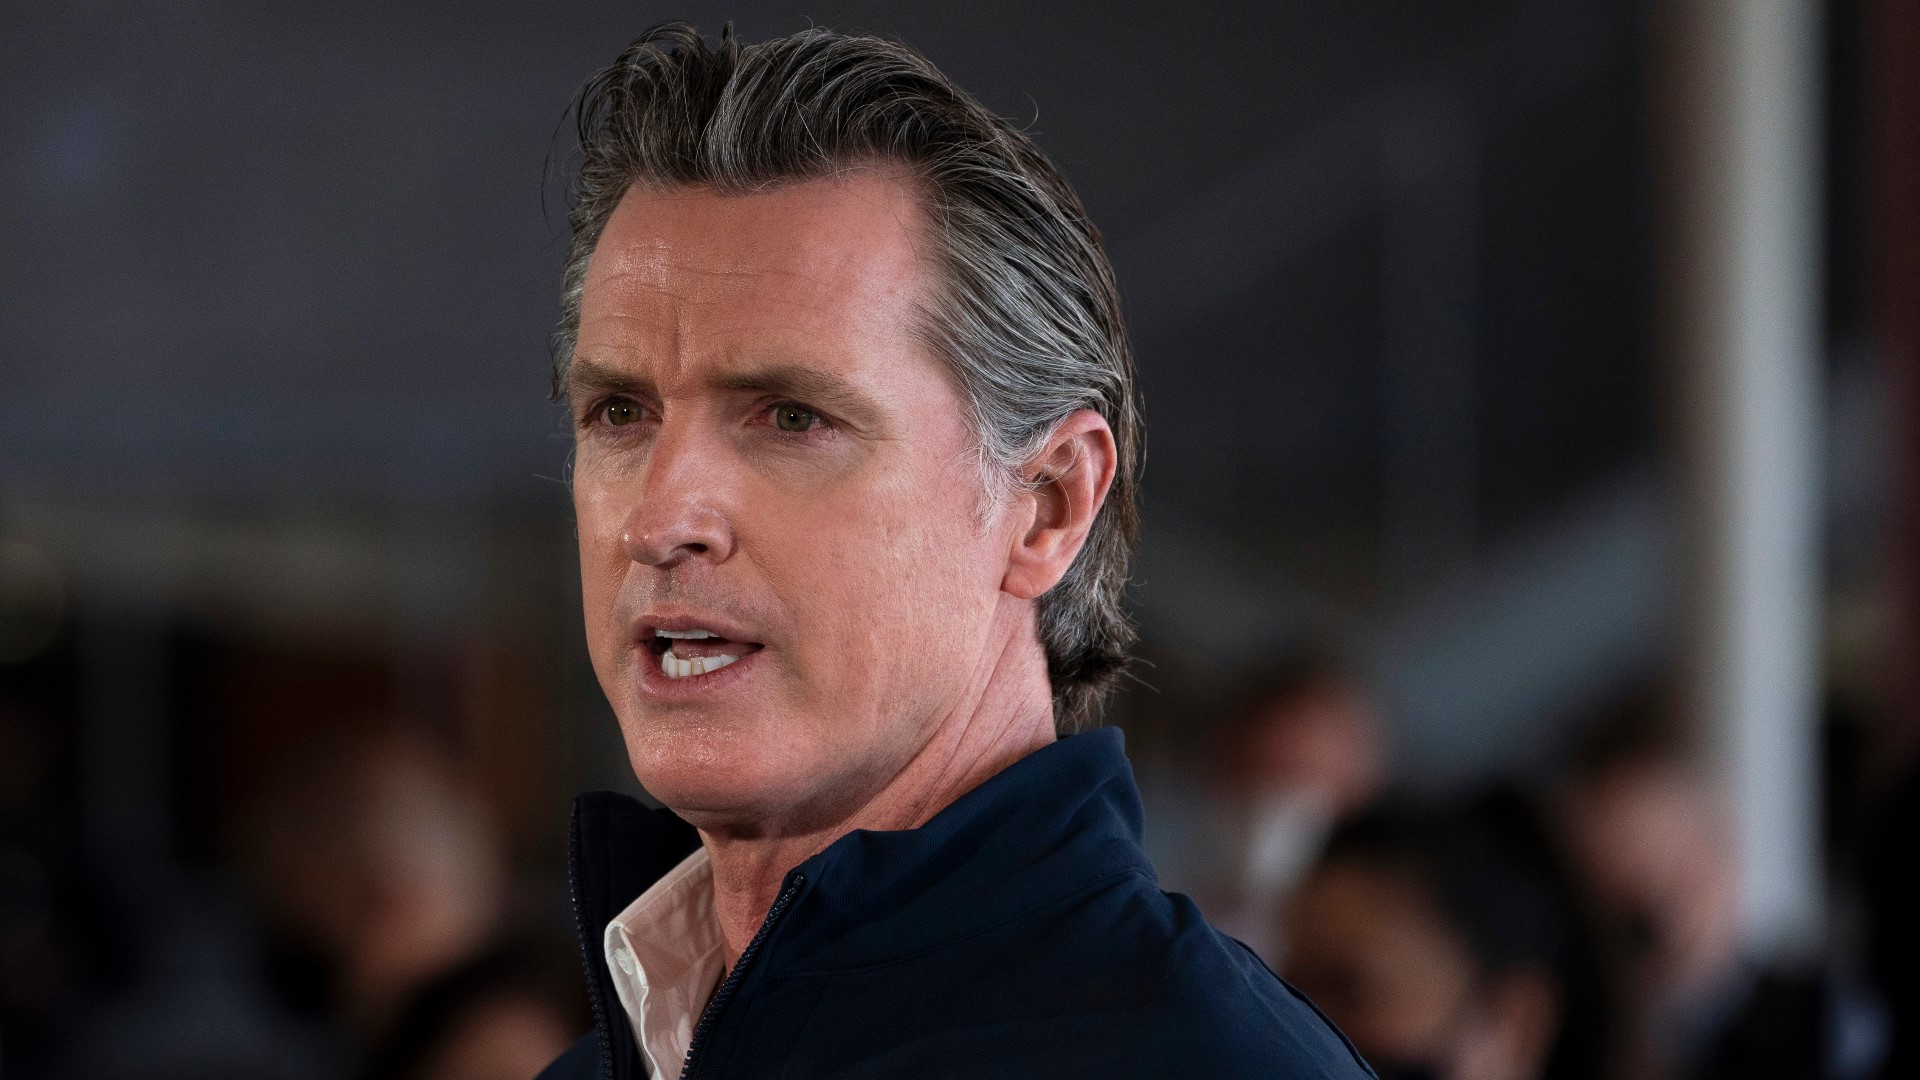 Officials say enough signatures have been gathered to trigger the next phase of the recall process for Governor Gavin Newsom.